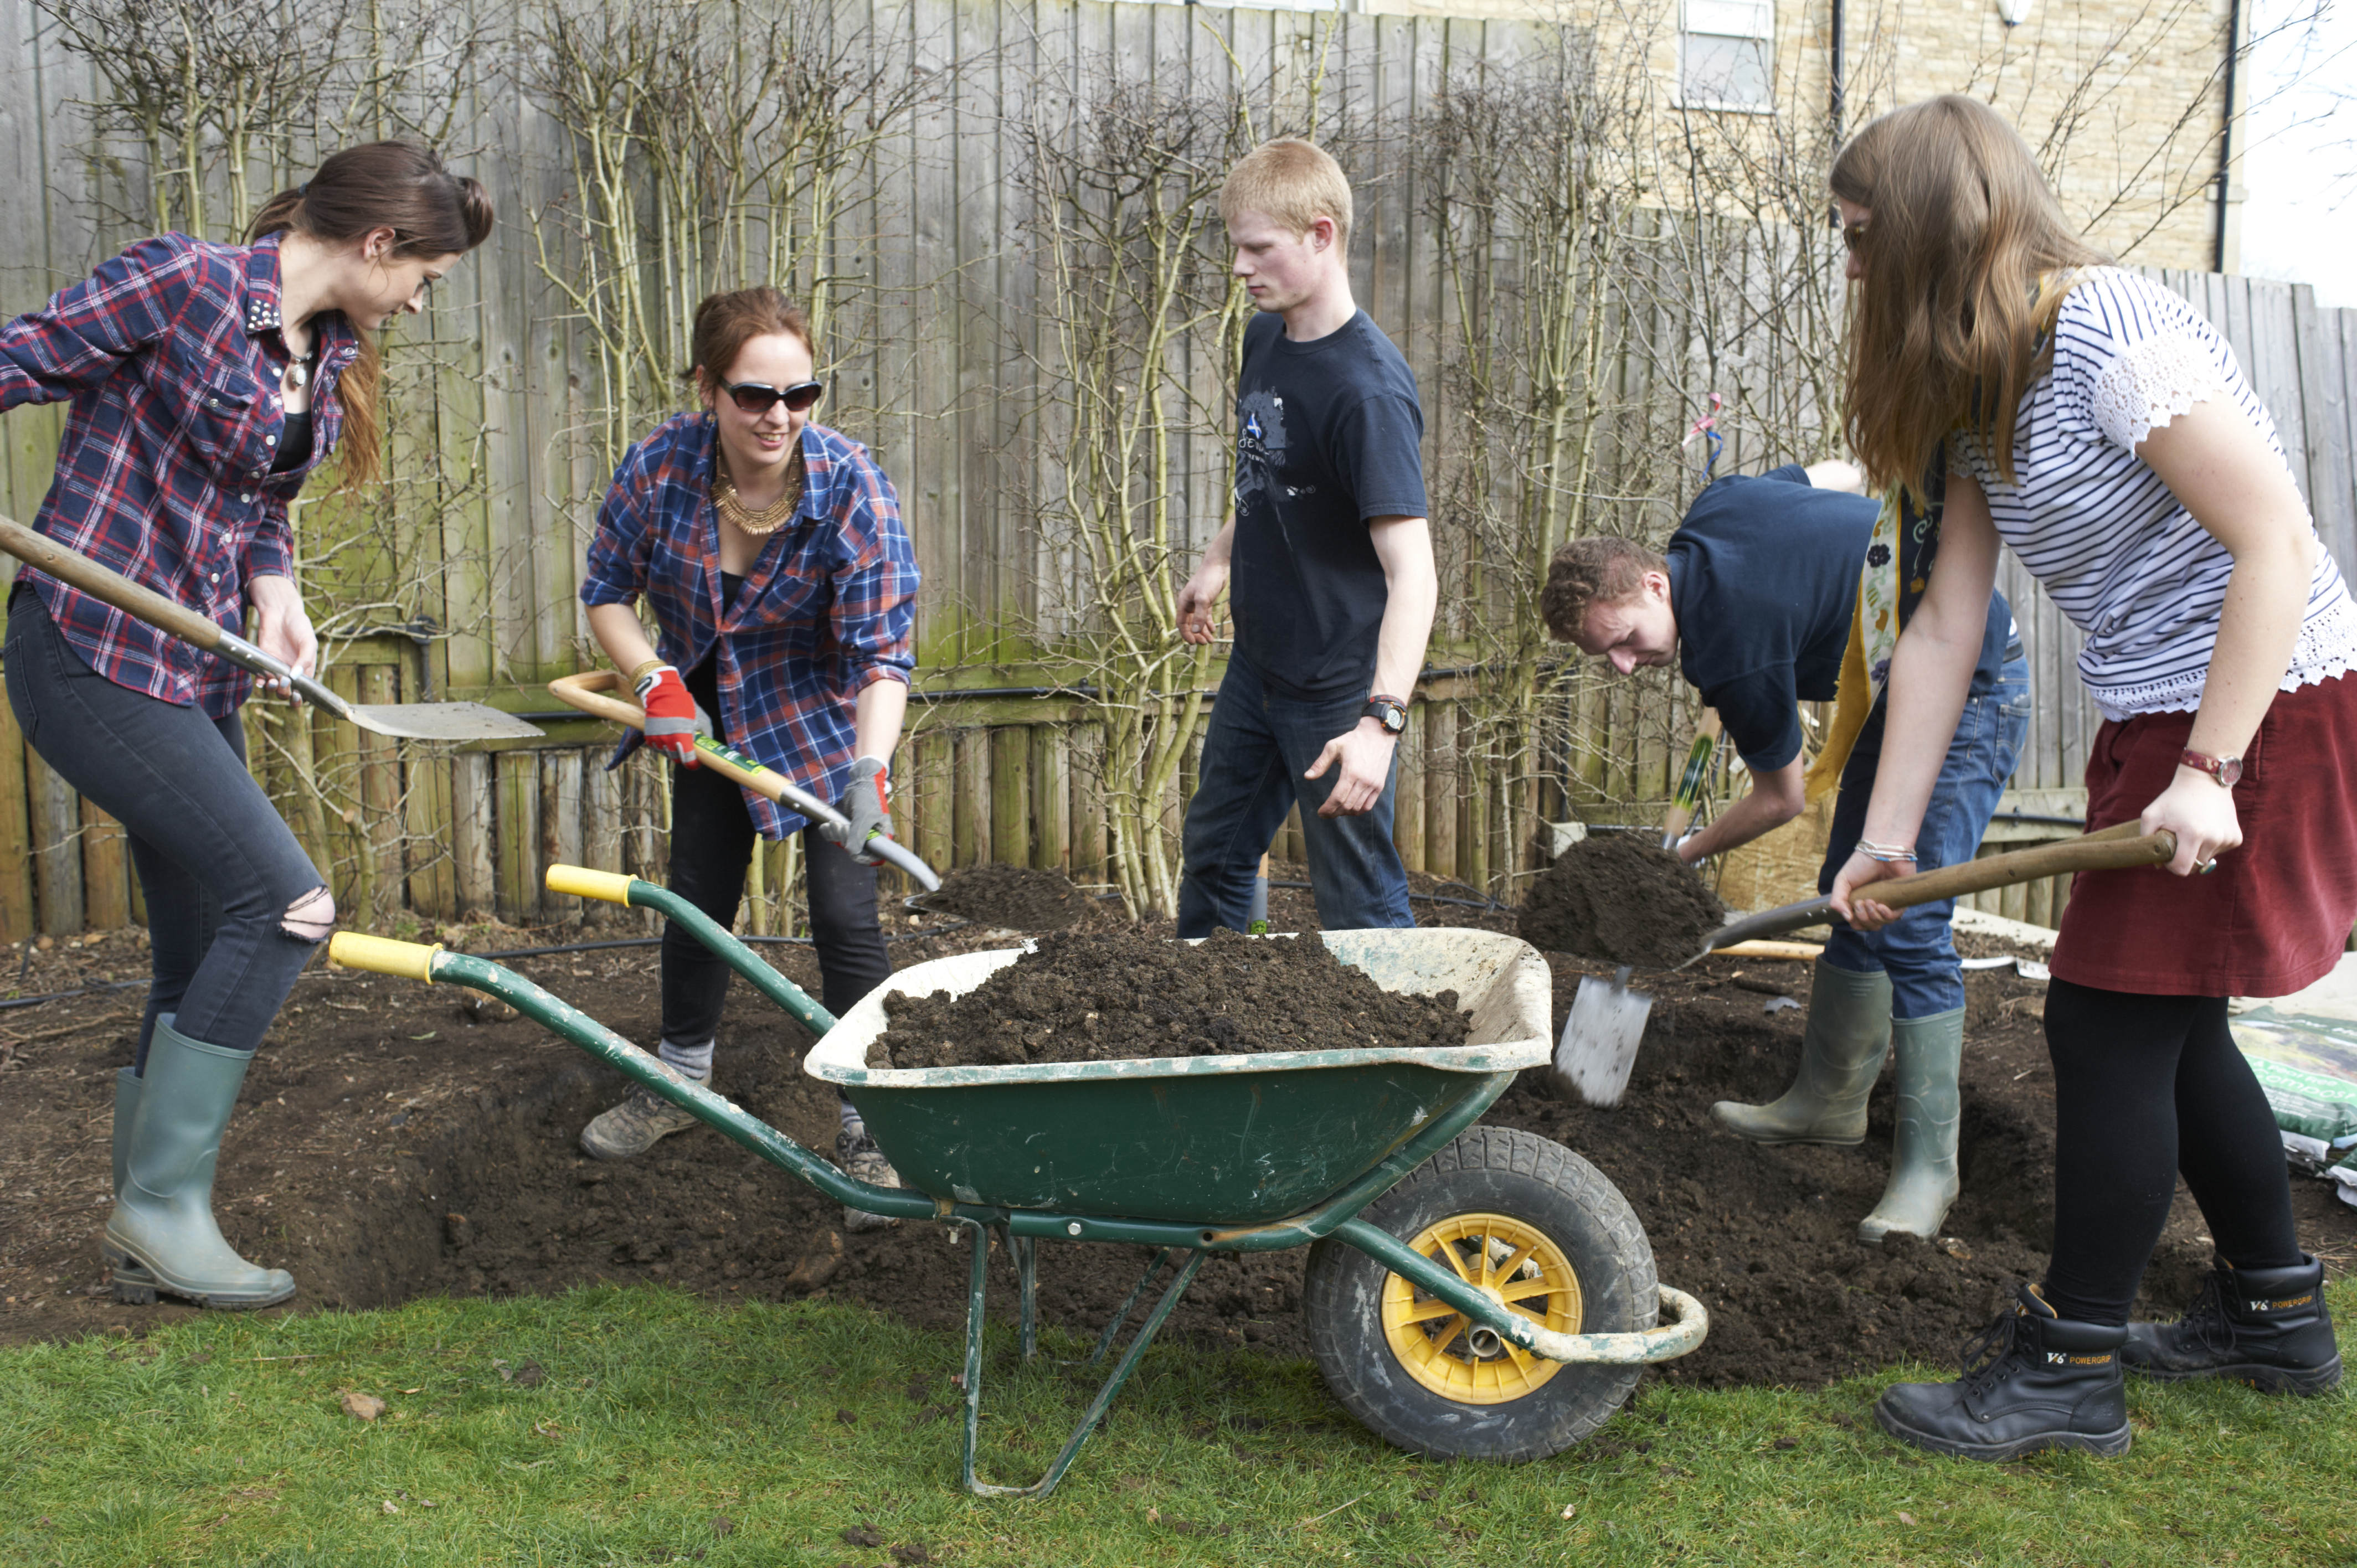 Homebase: The Garden Academy returns for its third consecutive year to offer young people opportunity to kick start a career in gardening